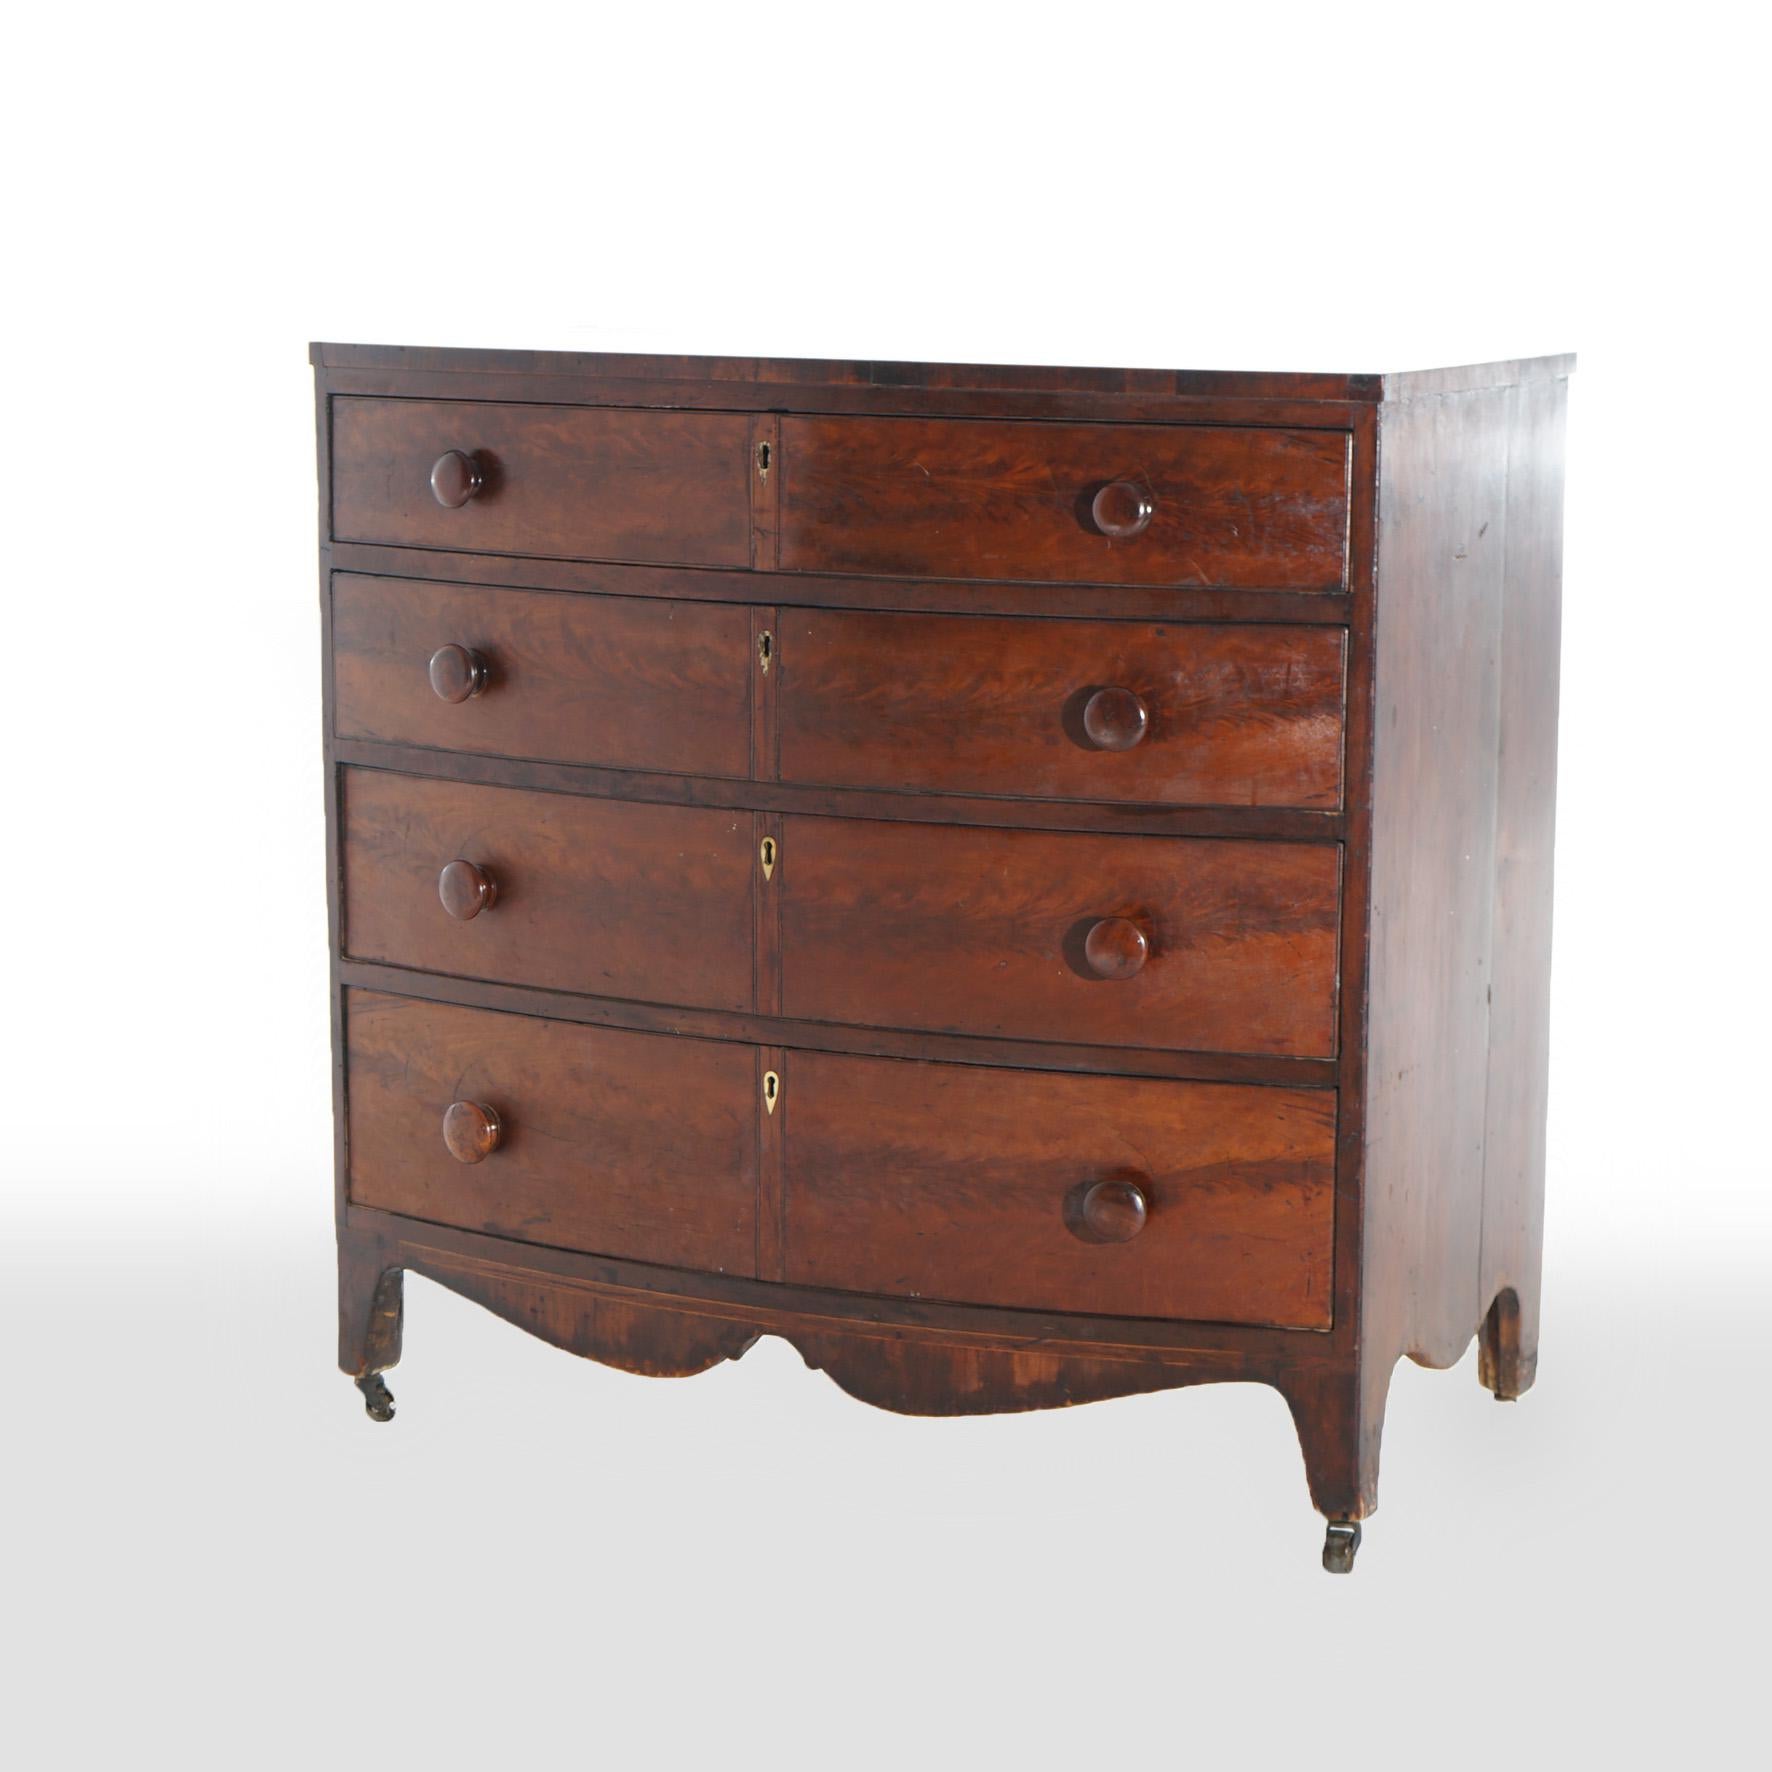 An antique English Hepplewhite chest offers flame mahogany construction in bow-front form with four graduated long drawers over shaped skirt and raised on splayed legs, c1830

Measures - 38.75